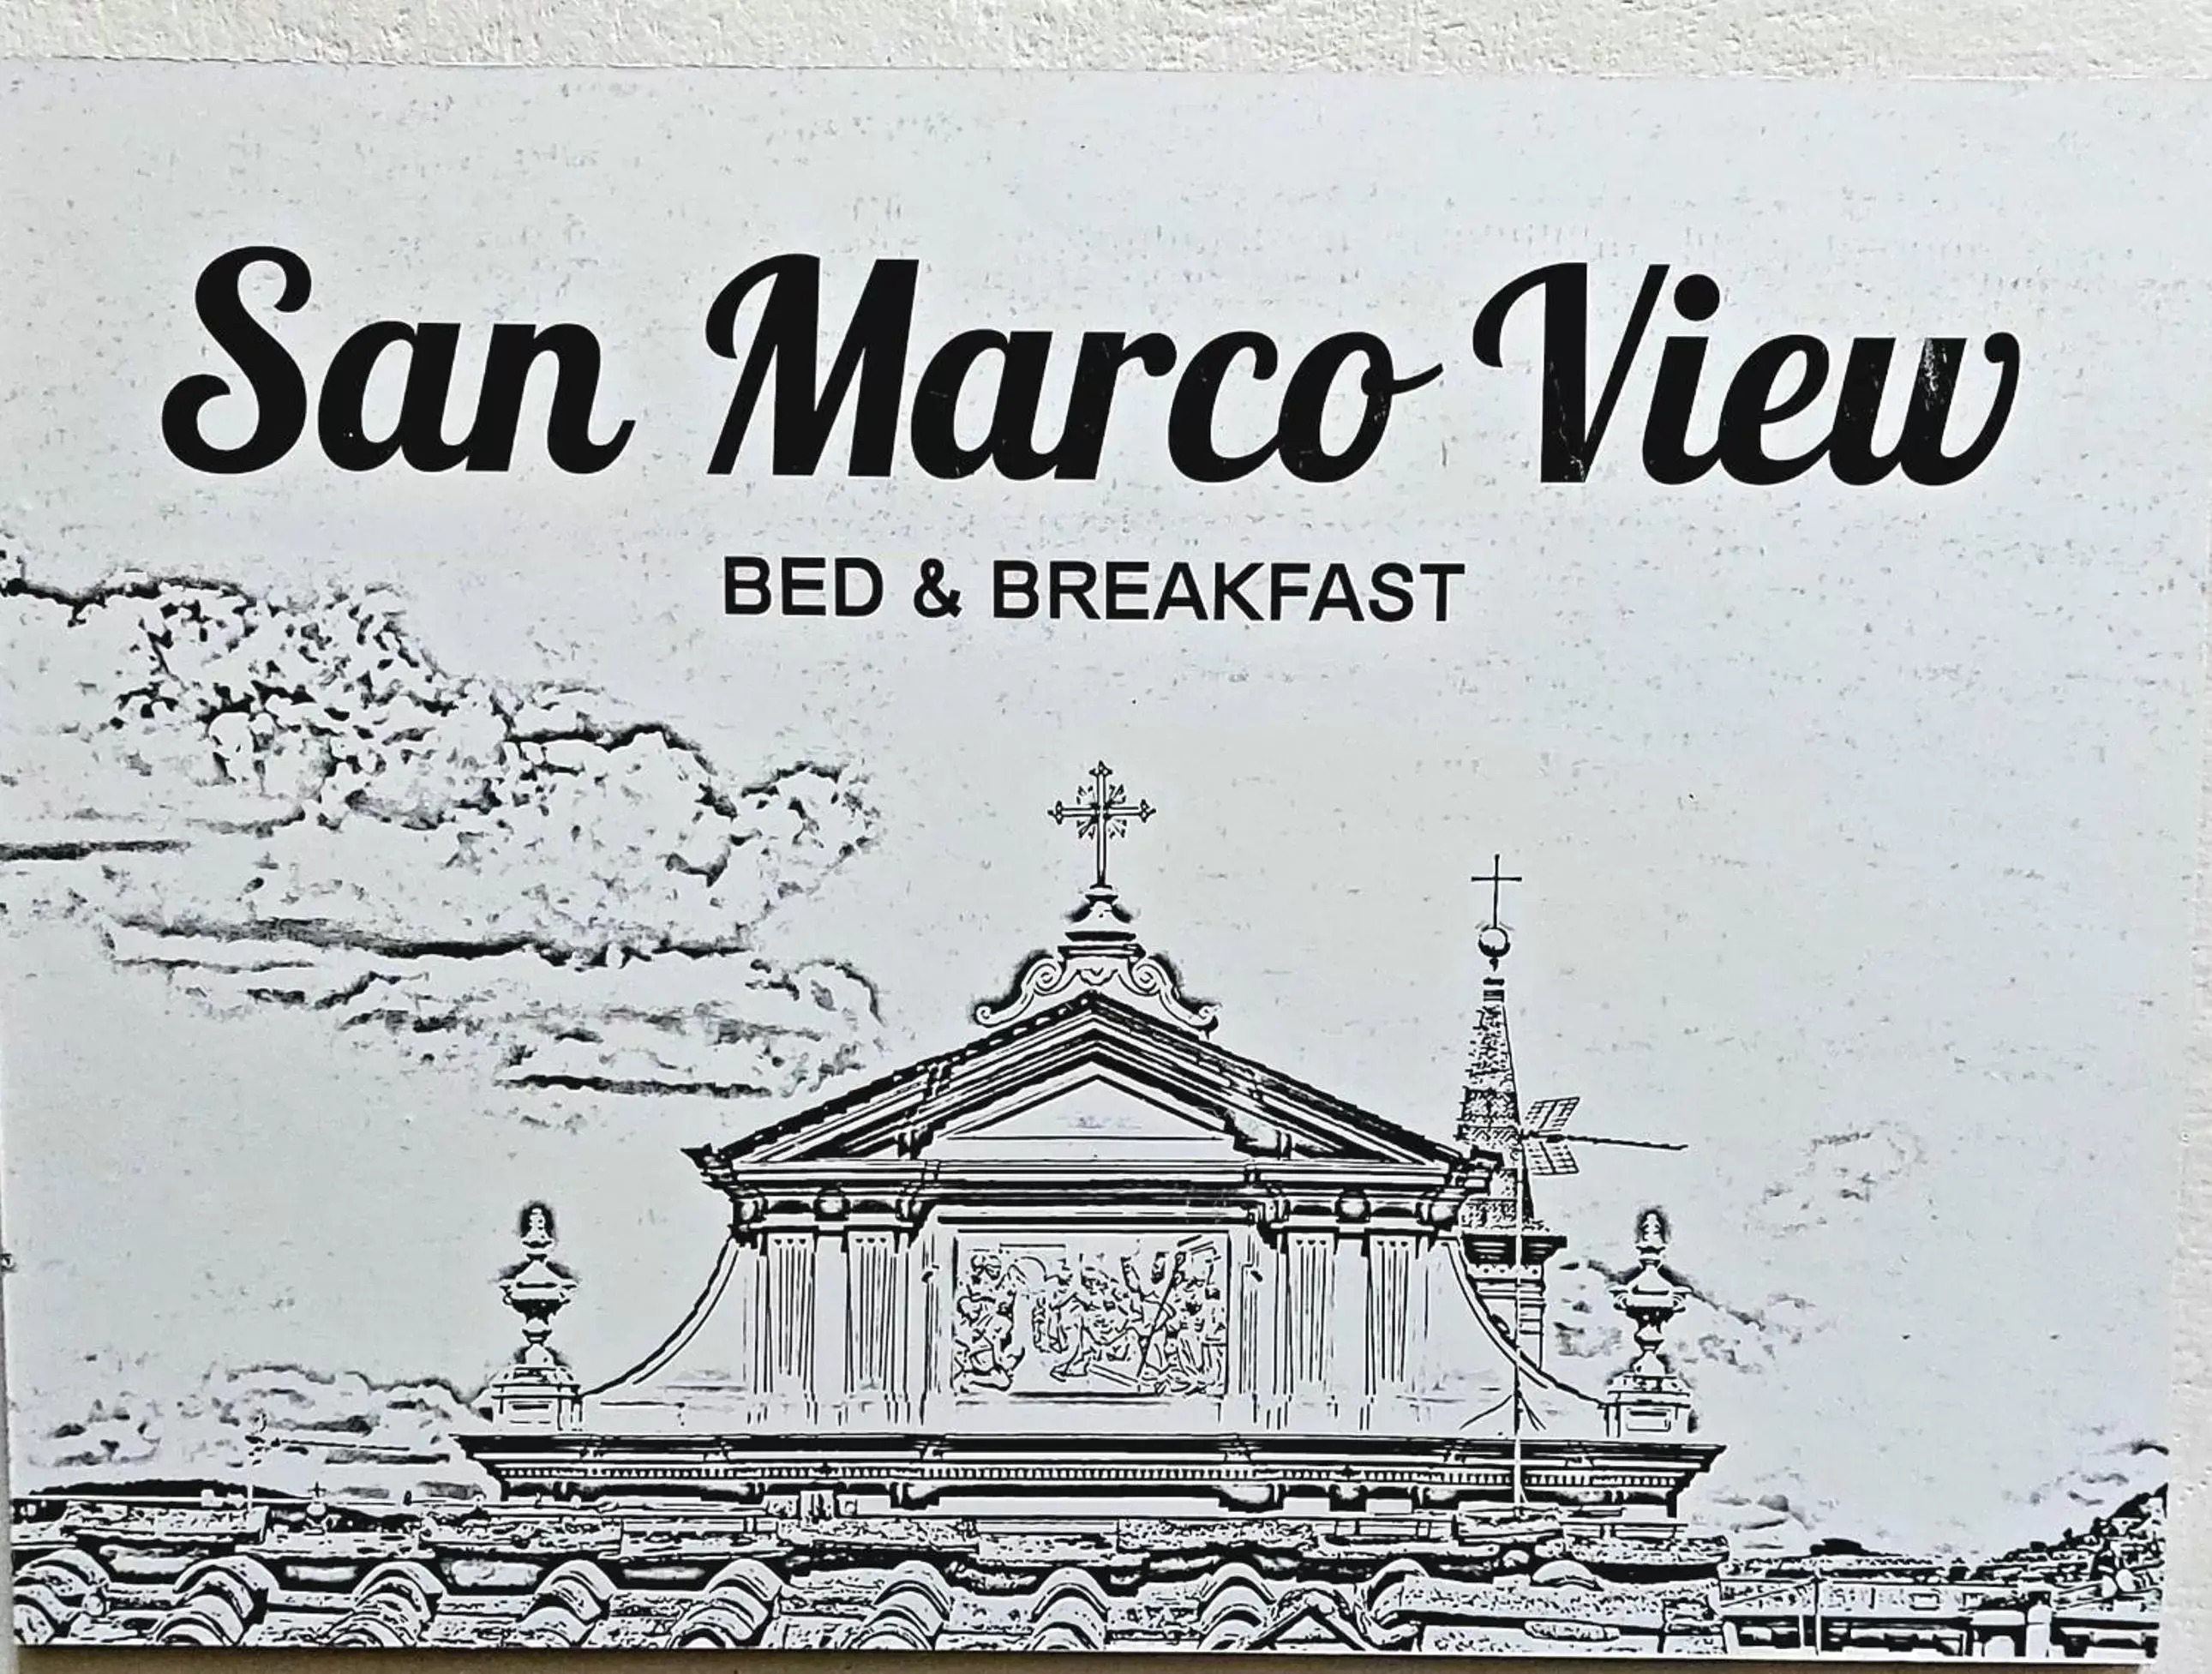 Logo/Certificate/Sign in San Marco View